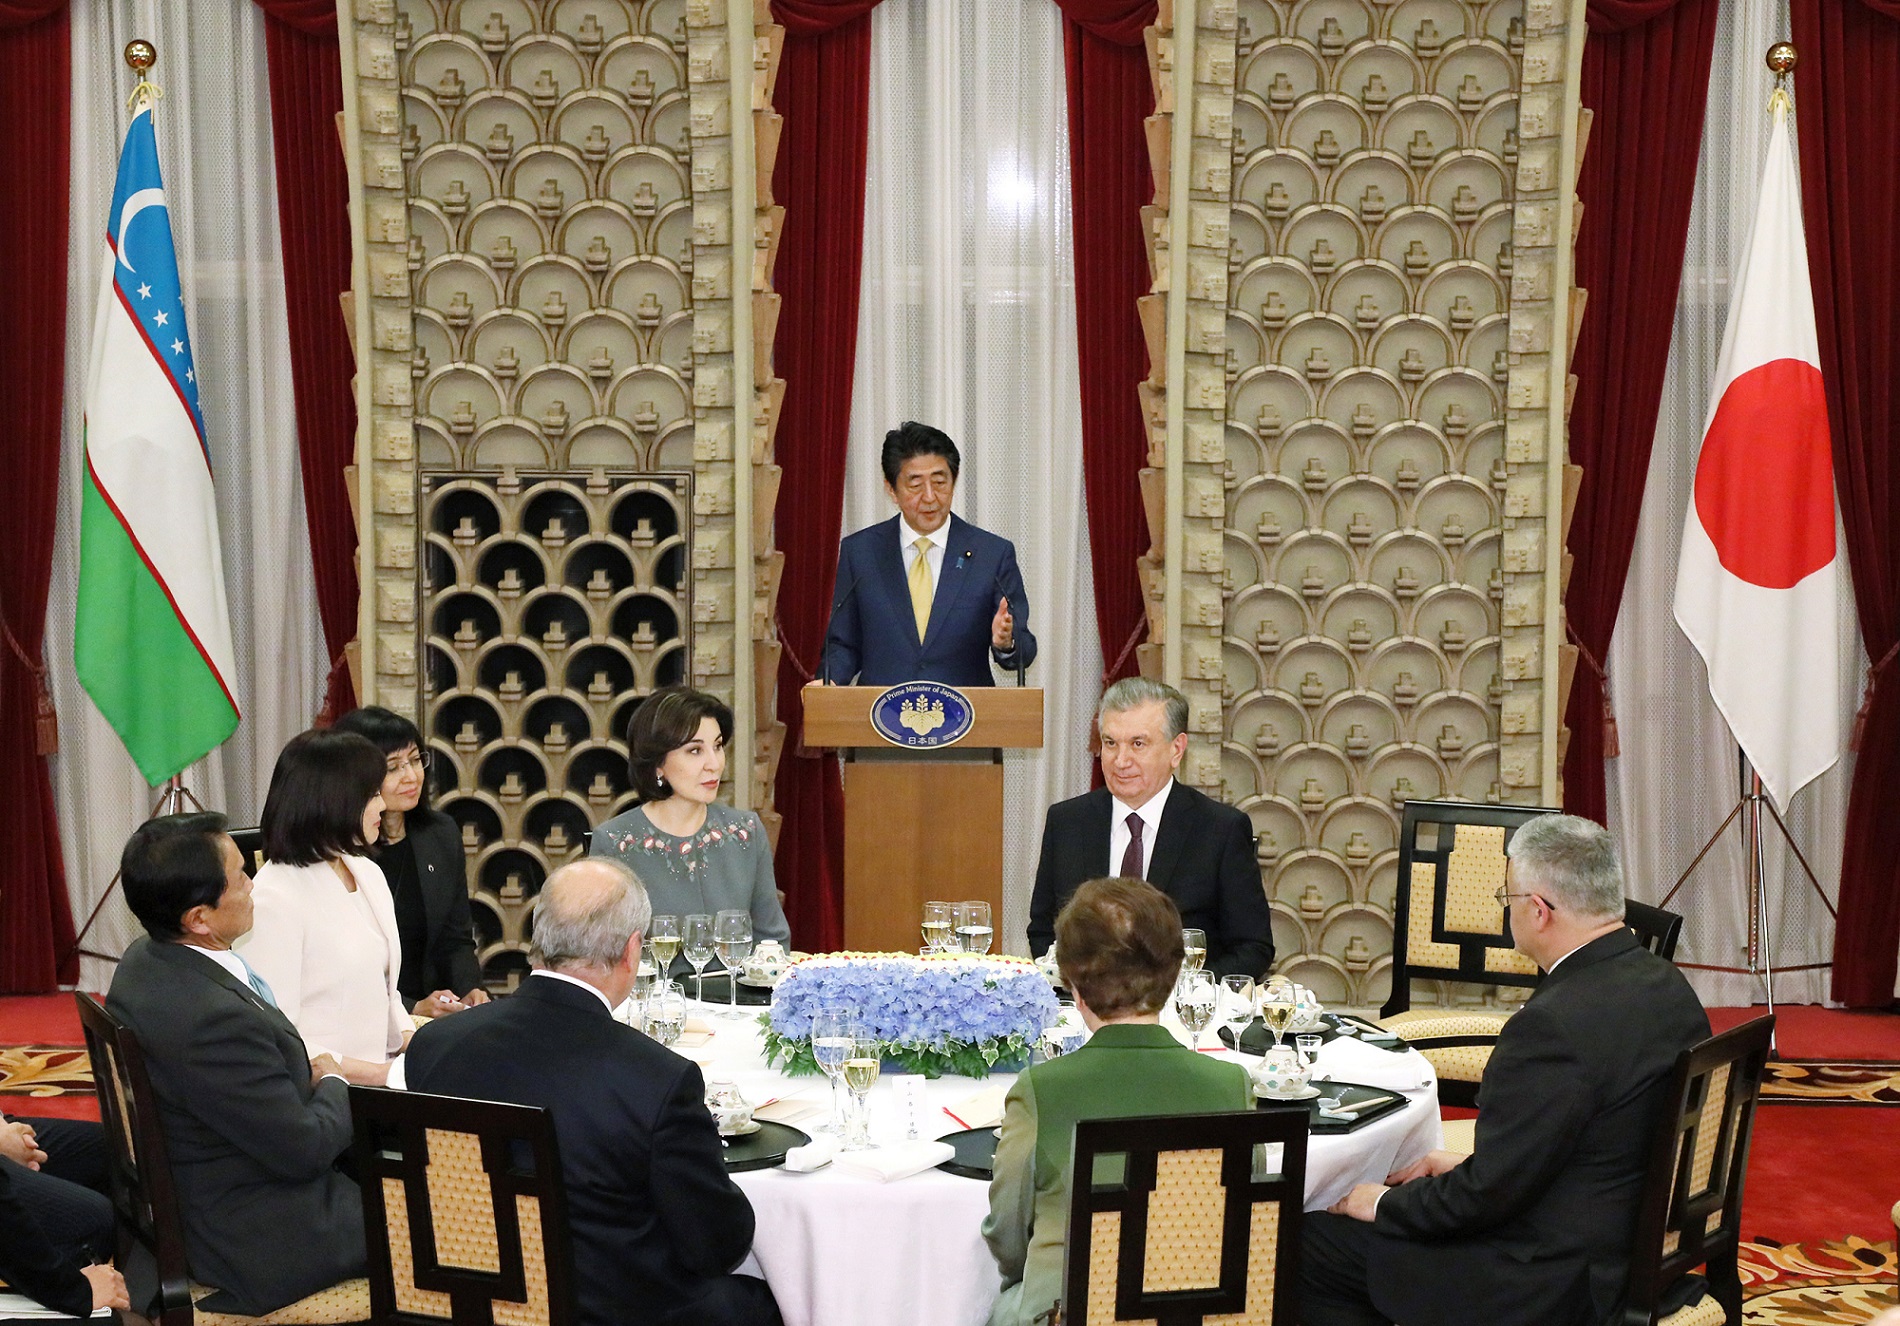 Photograph of the Prime Minister delivering an address at the banquet (1)